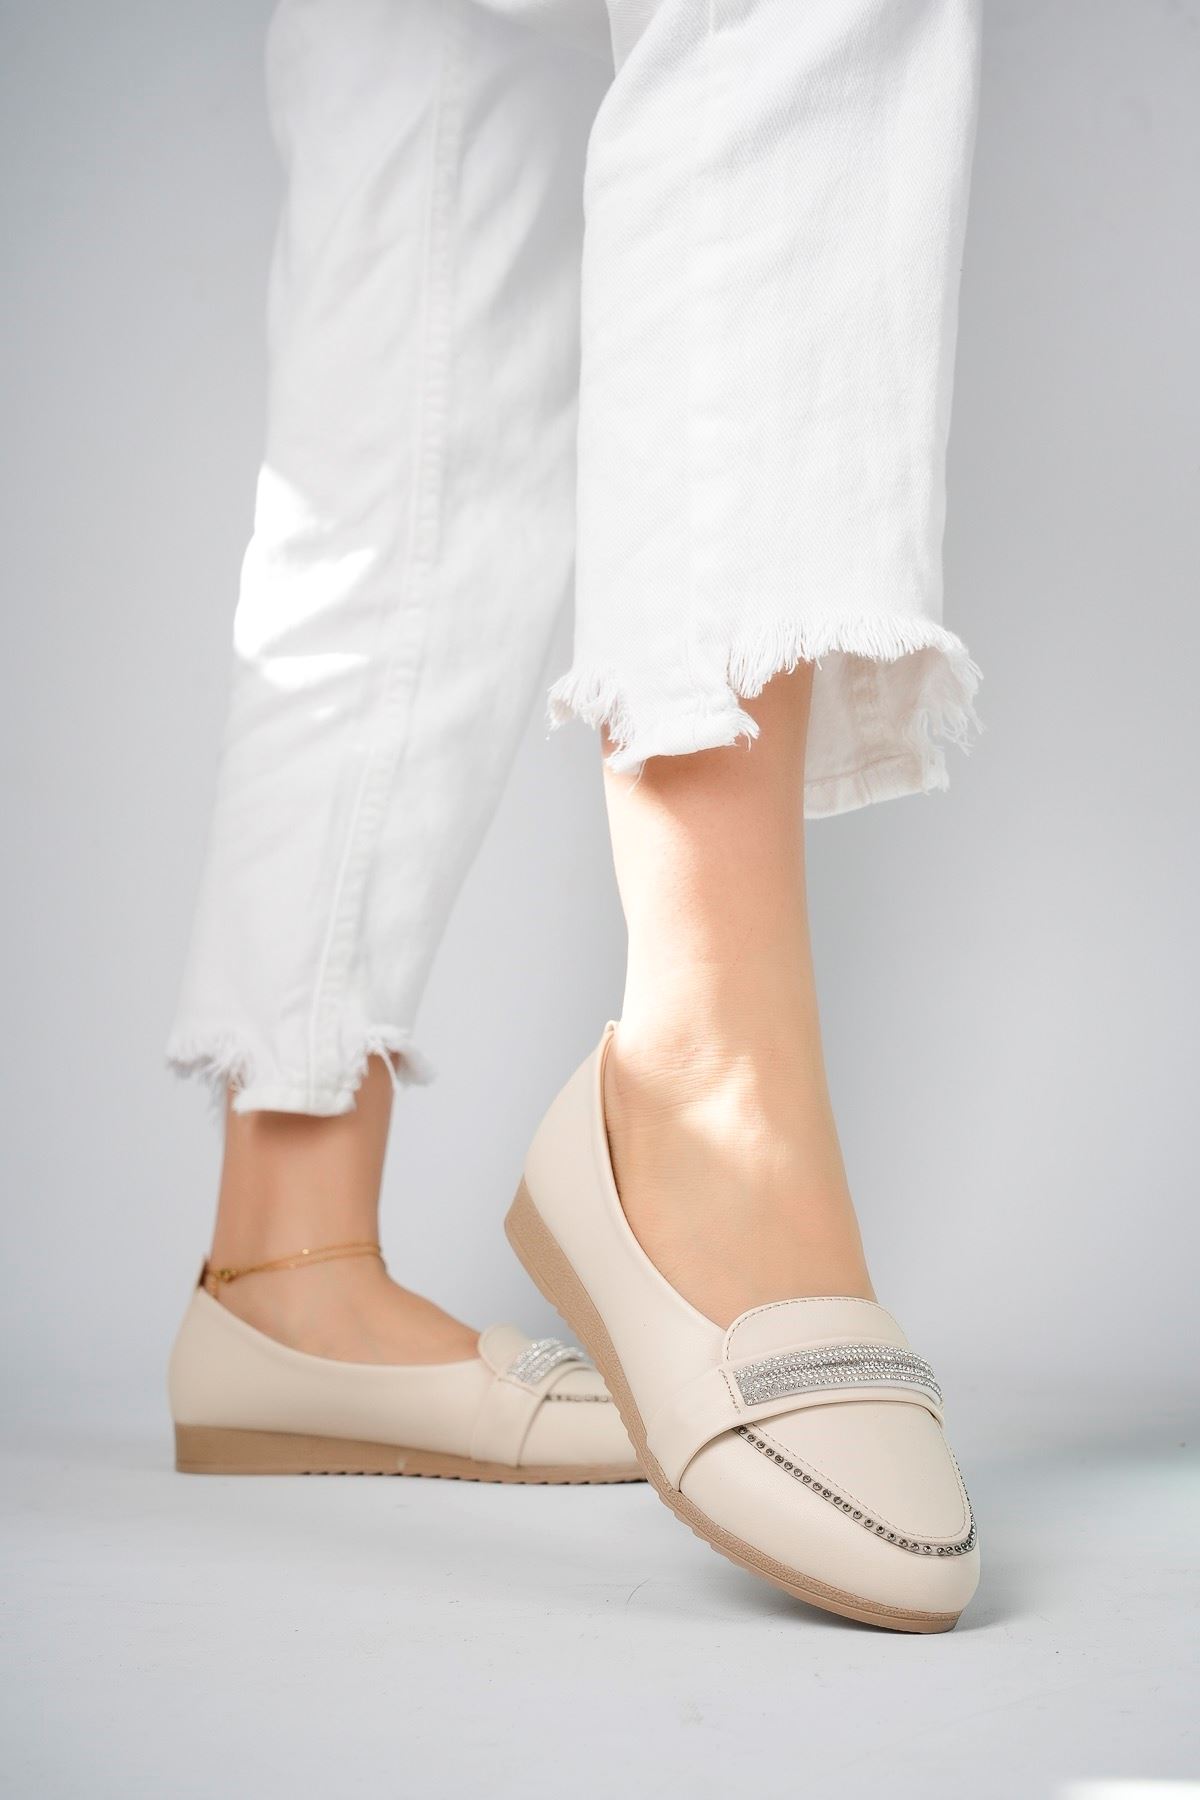 Cream Women's Shoes with Stones and Two Bias Bands